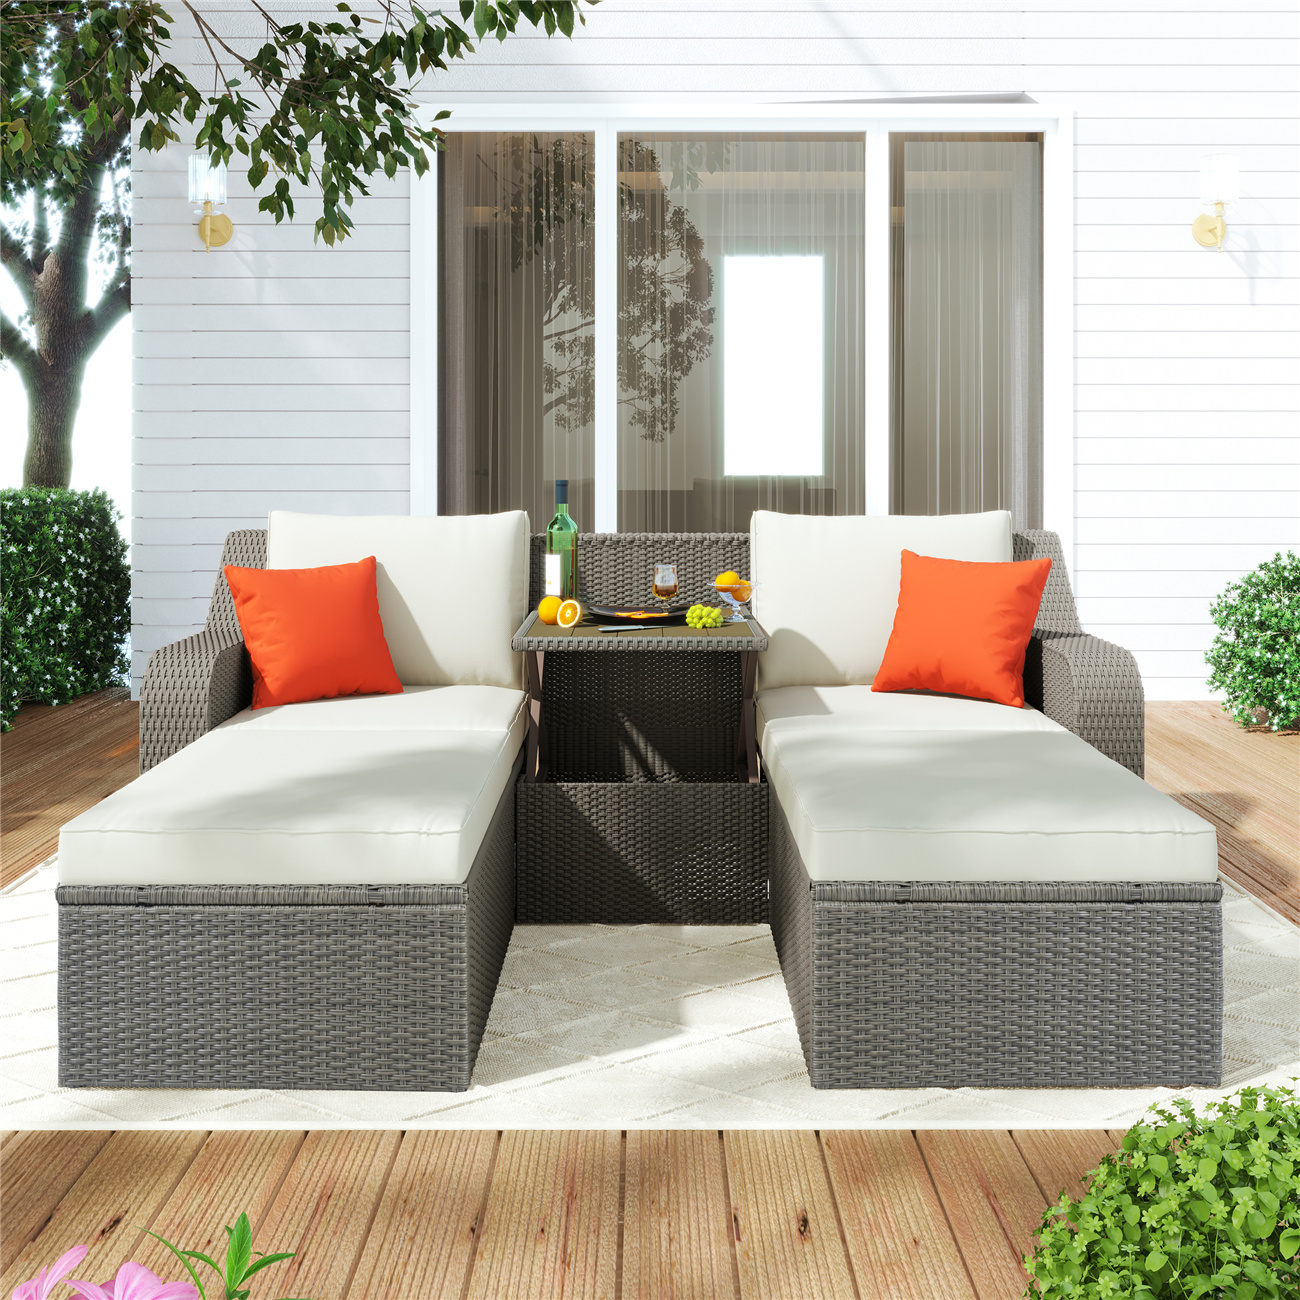 Patio Furniture Set, 3-Piece Sectional Wicker Sofa with Cushions, Pillows, Ottomans and Lift Top Coffee Table, Outdoor Lounge Chair Conversation Set for Balcony, Garden, Backyard, Beige - image 2 of 7